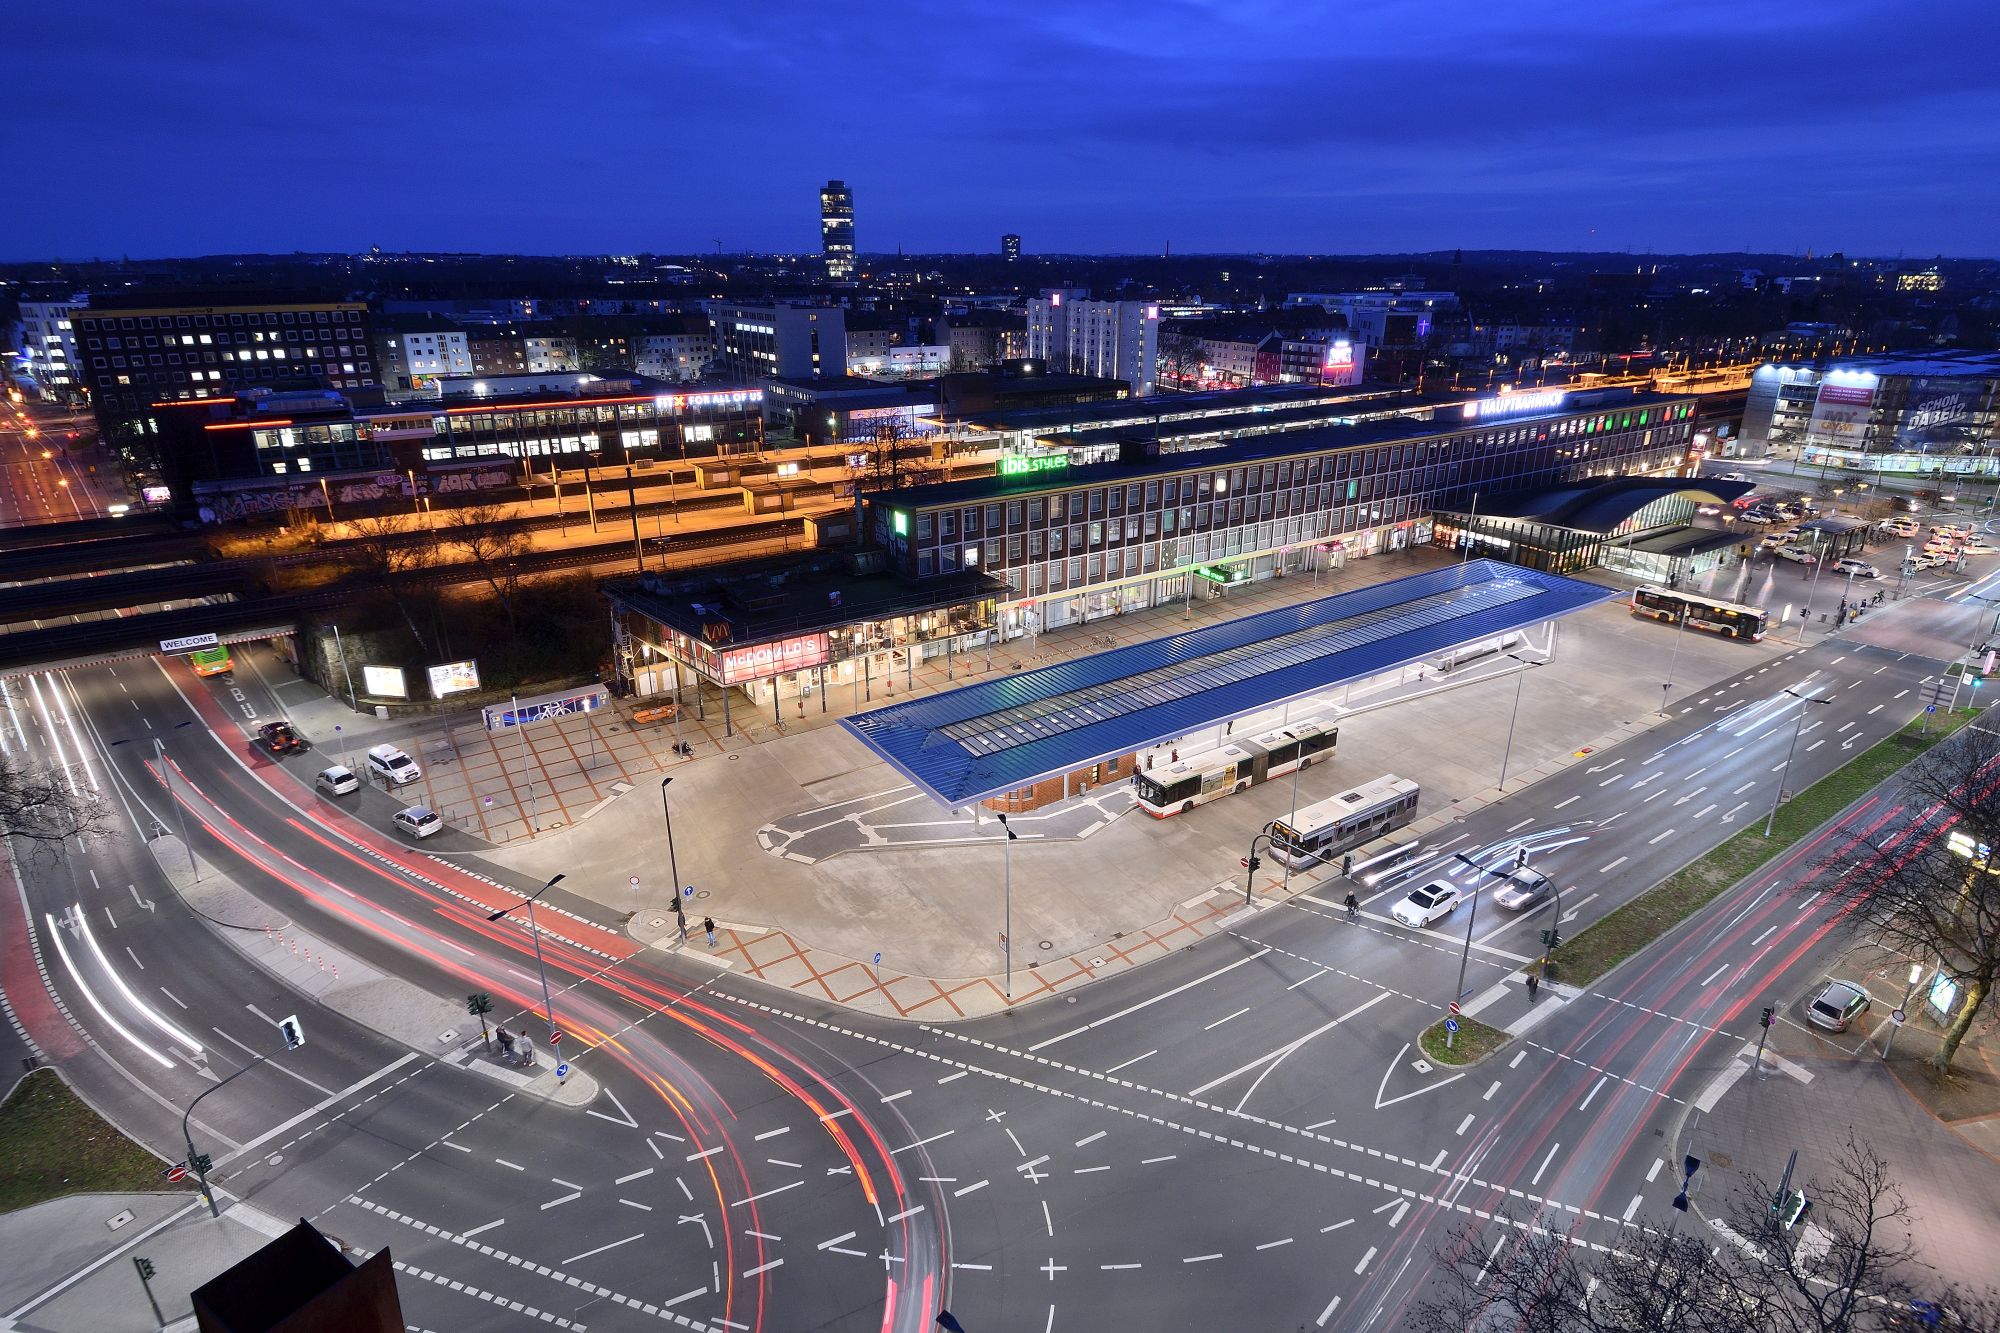 View of Bochum main station from above at night